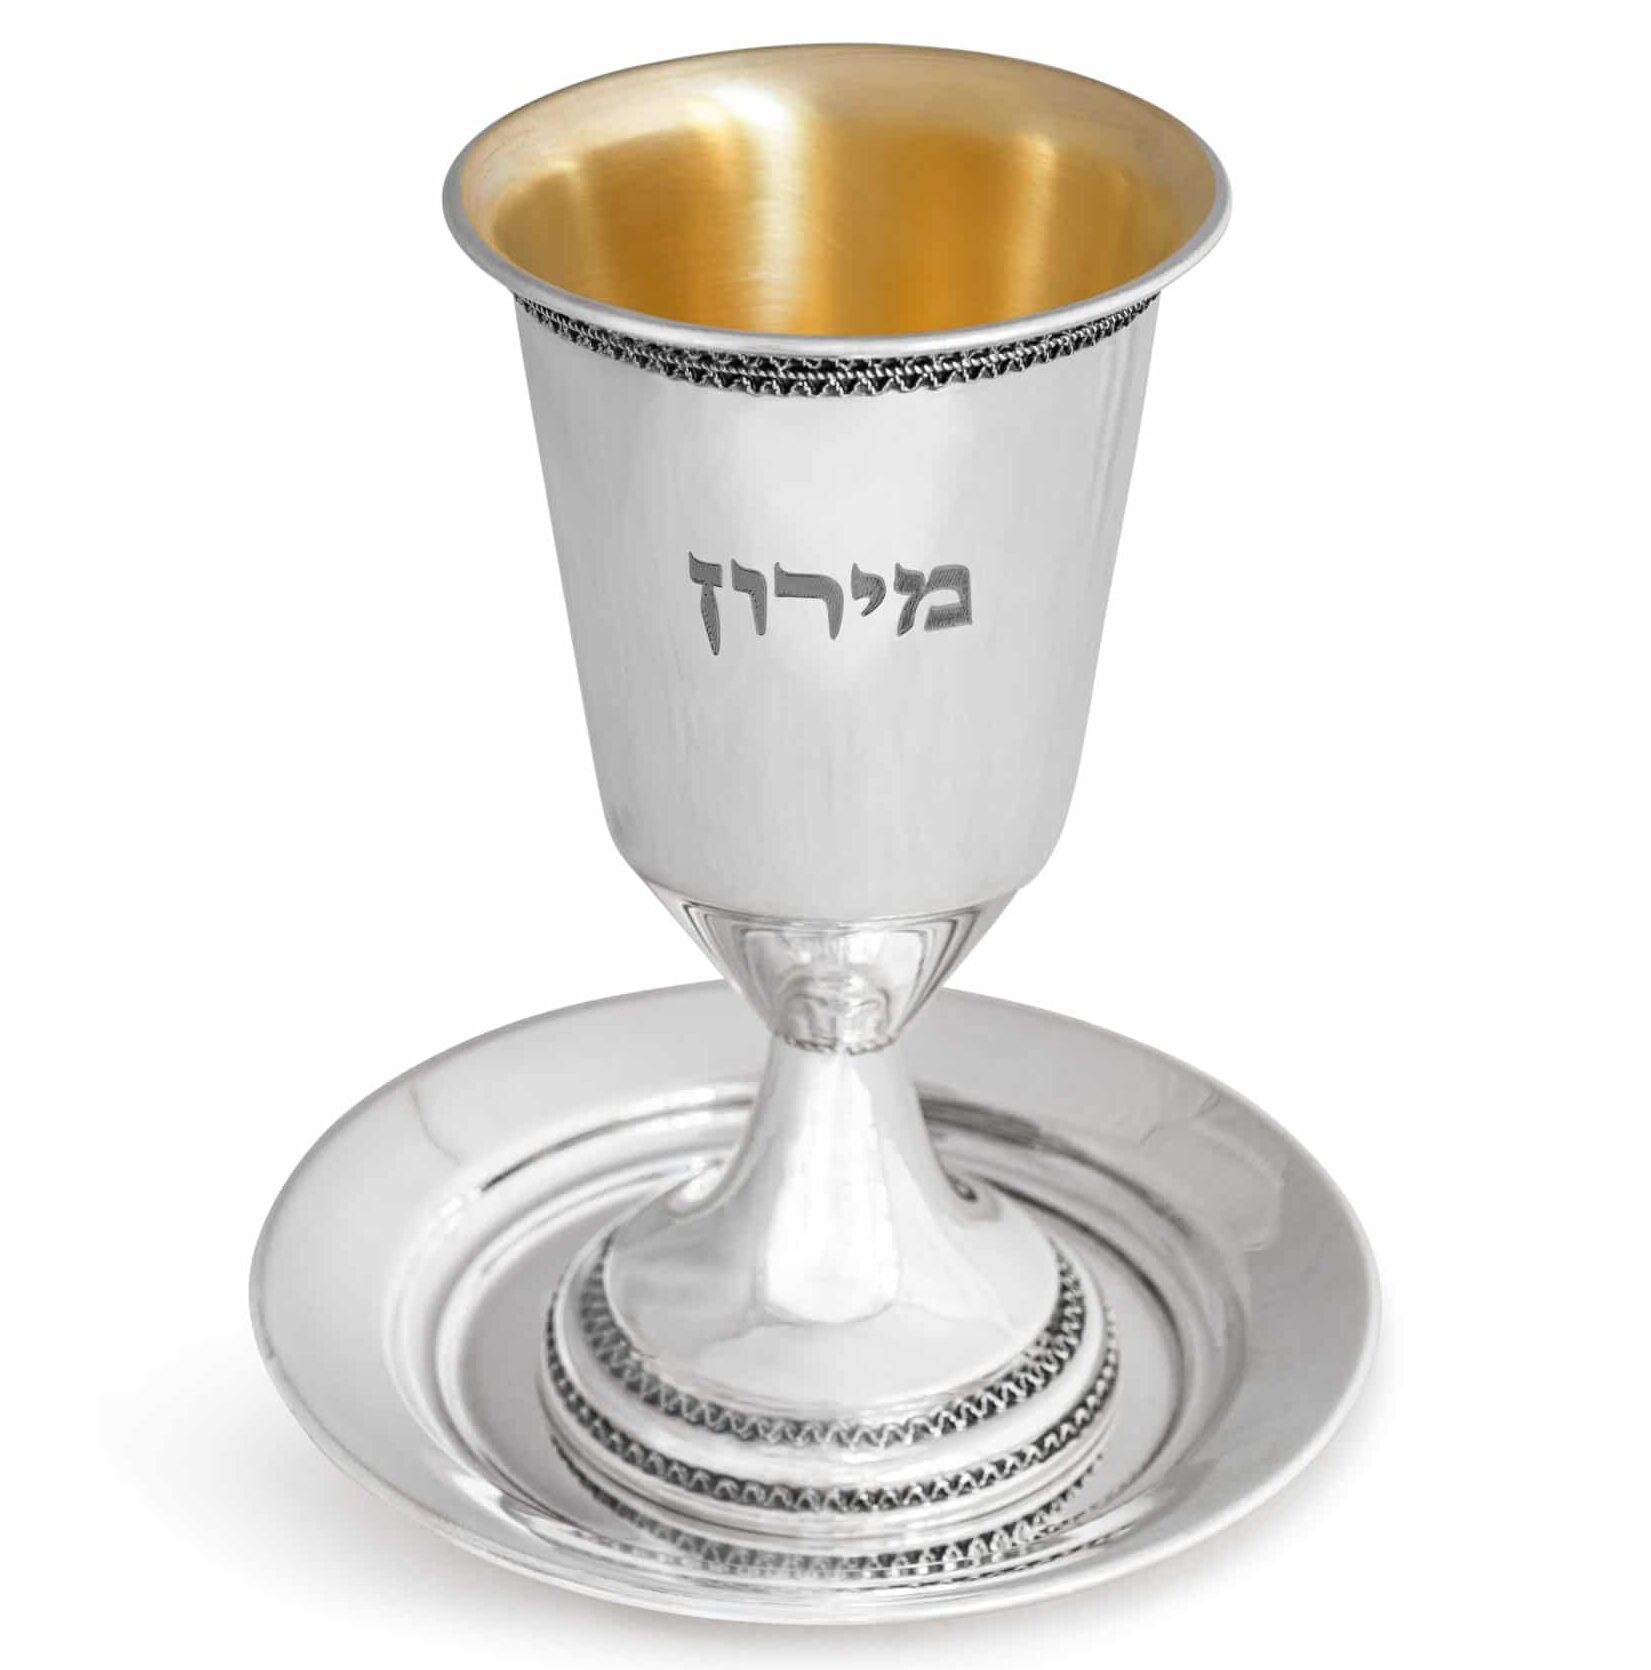 Personalized Engraved Kiddush Cup